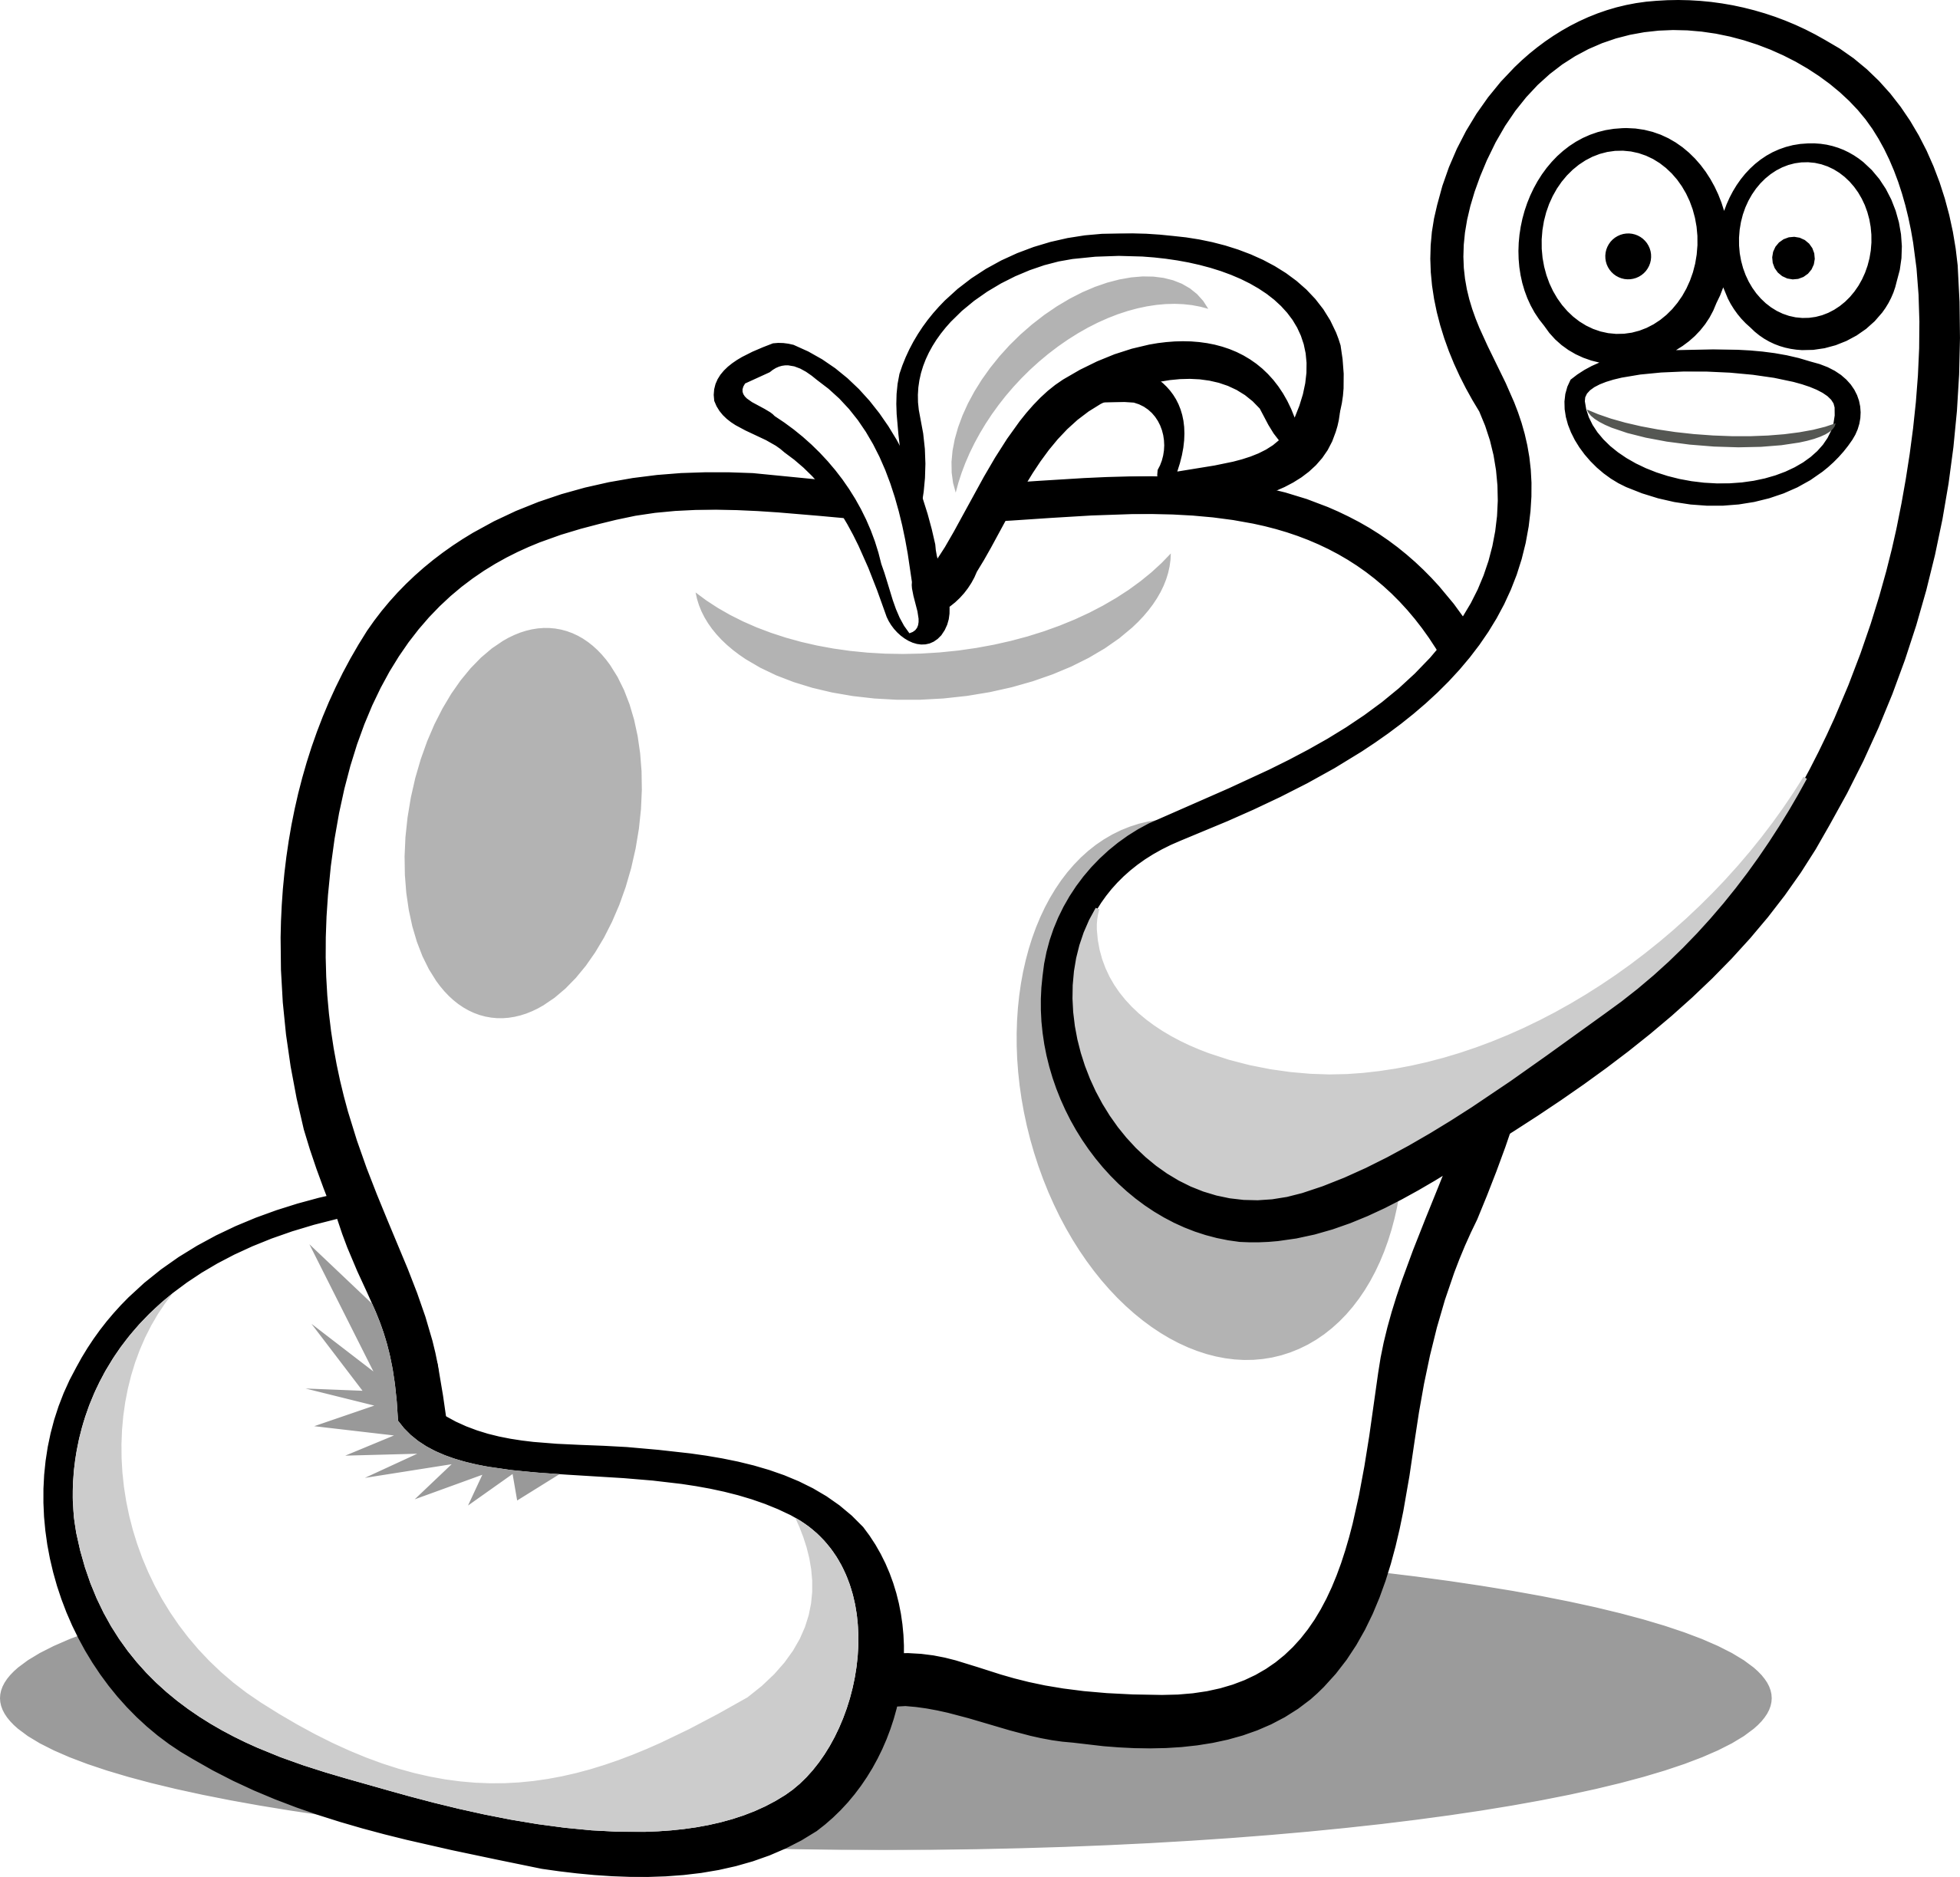 Book black and white. Worm clipart eating plant